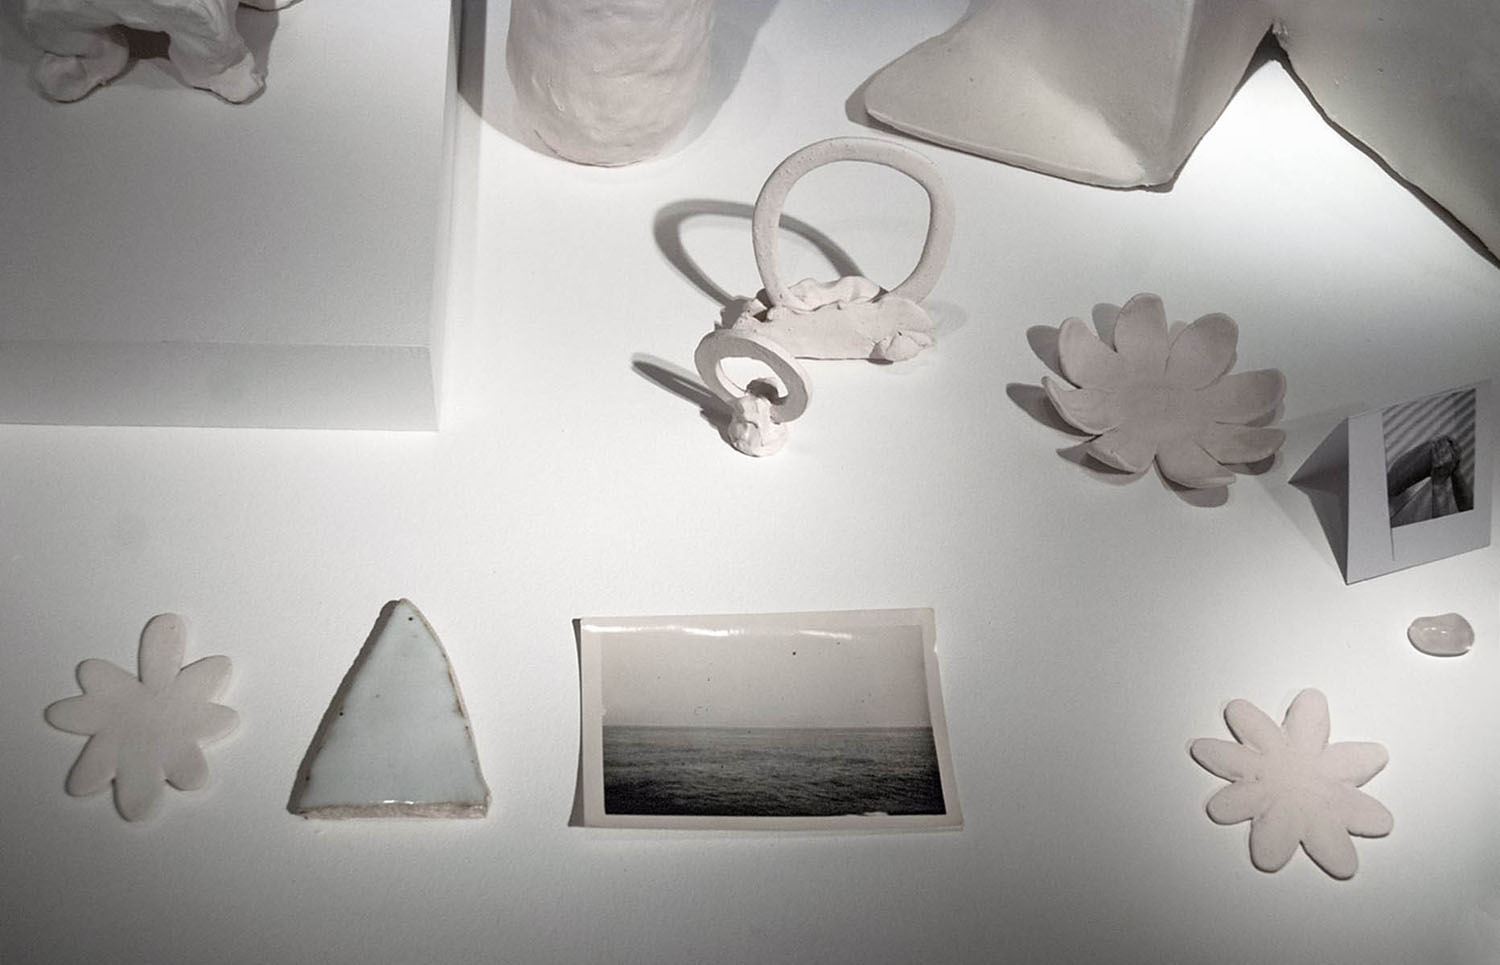   Land, Sea, Air,  installation detail, 2013, glazed and unglazed ceramic, photograph, laser print, silicone, 11 x 36 x 19.5 inches 